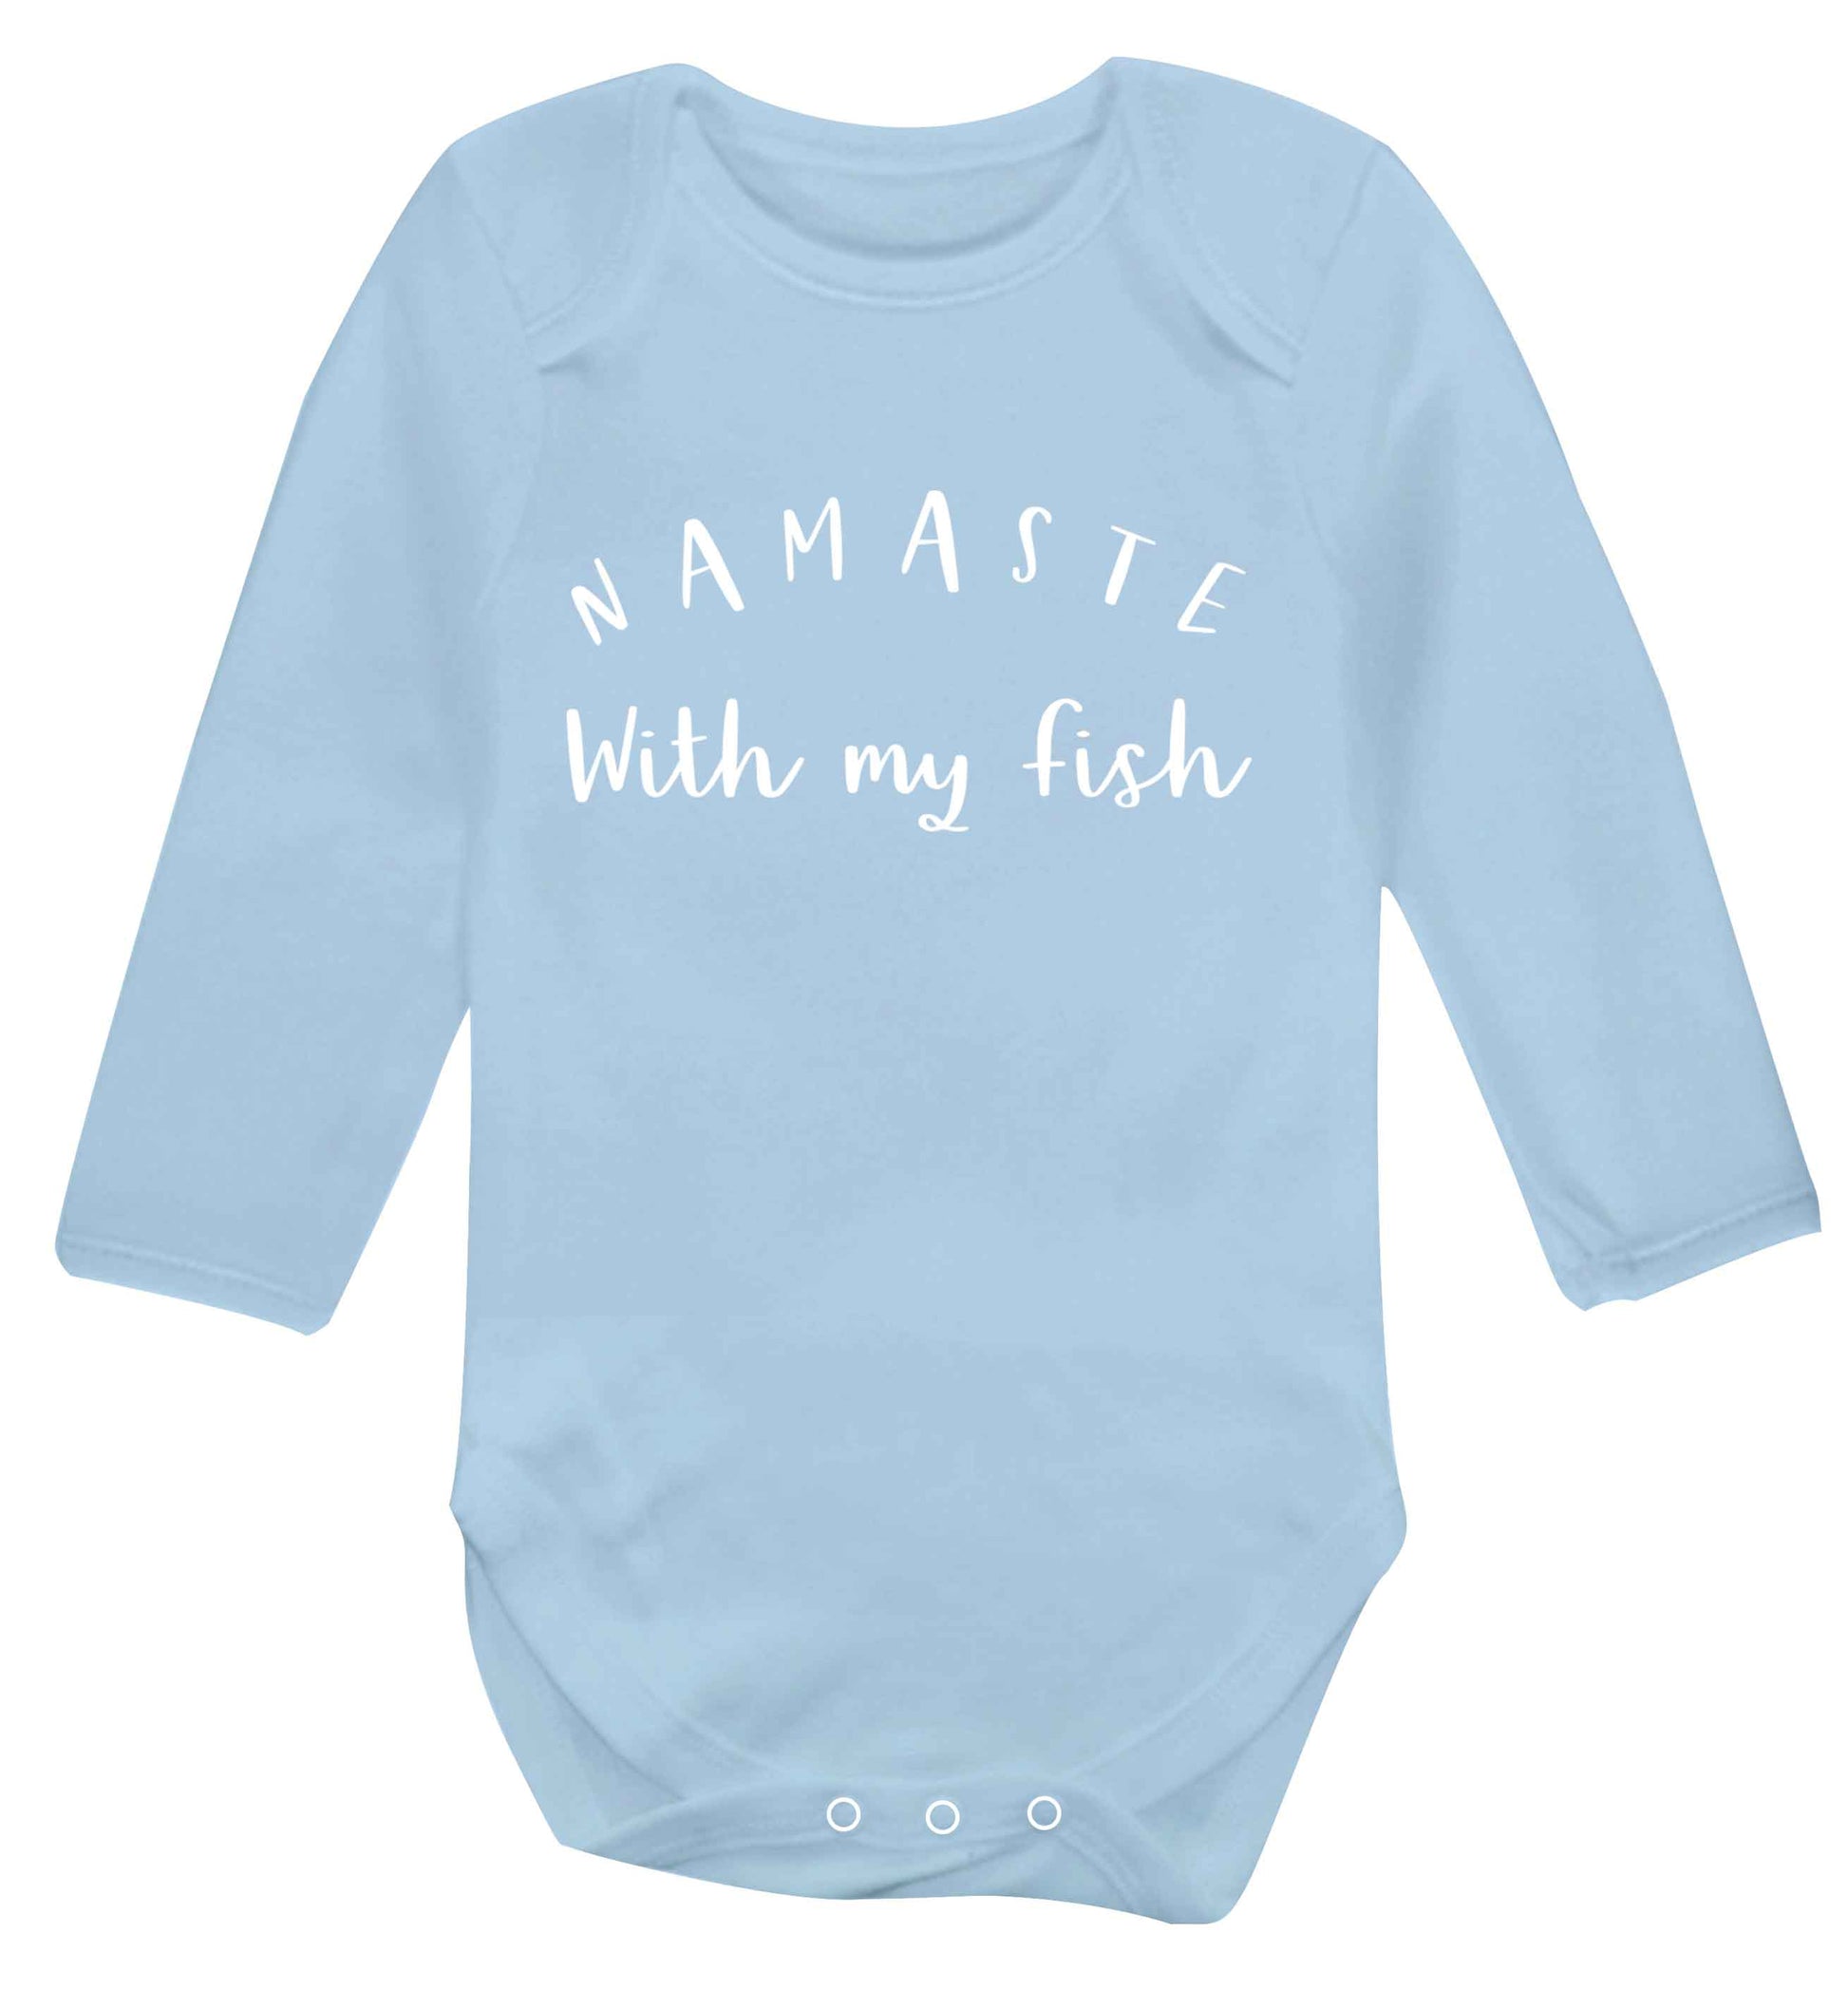 Namaste with my fish Baby Vest long sleeved pale blue 6-12 months